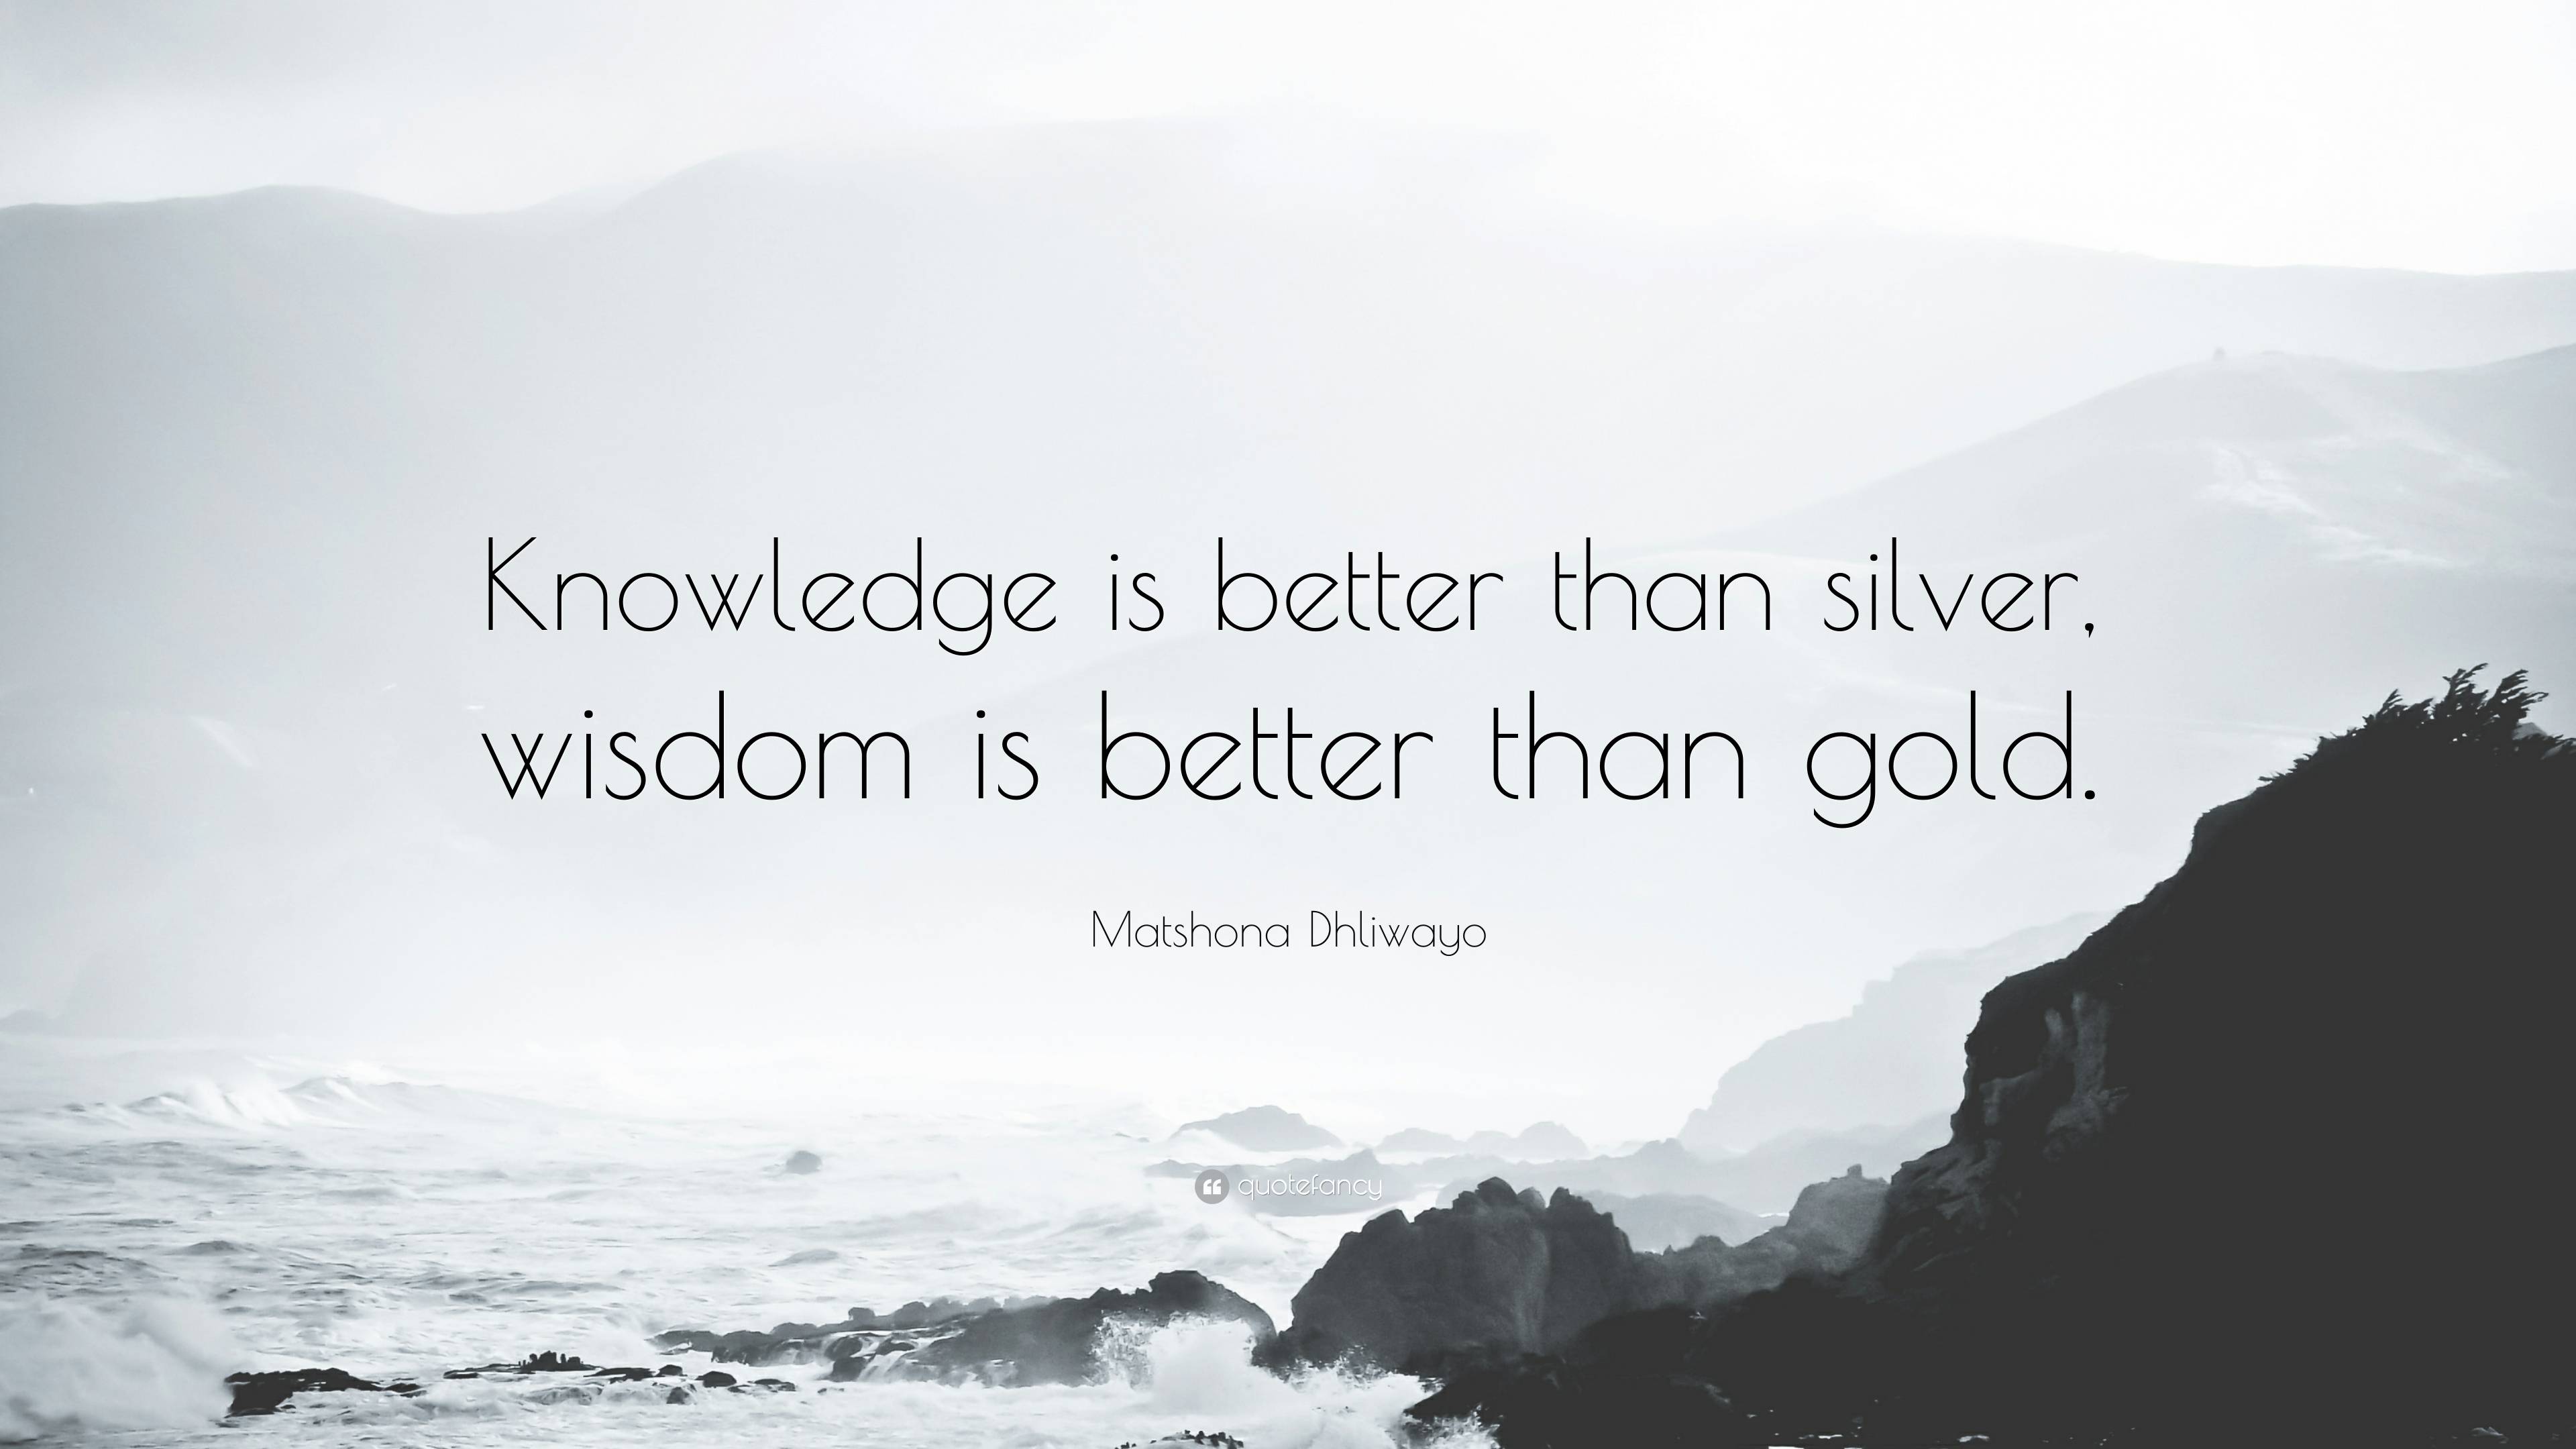 https://quotefancy.com/media/wallpaper/3840x2160/7244398-Matshona-Dhliwayo-Quote-Knowledge-is-better-than-silver-wisdom-is.jpg